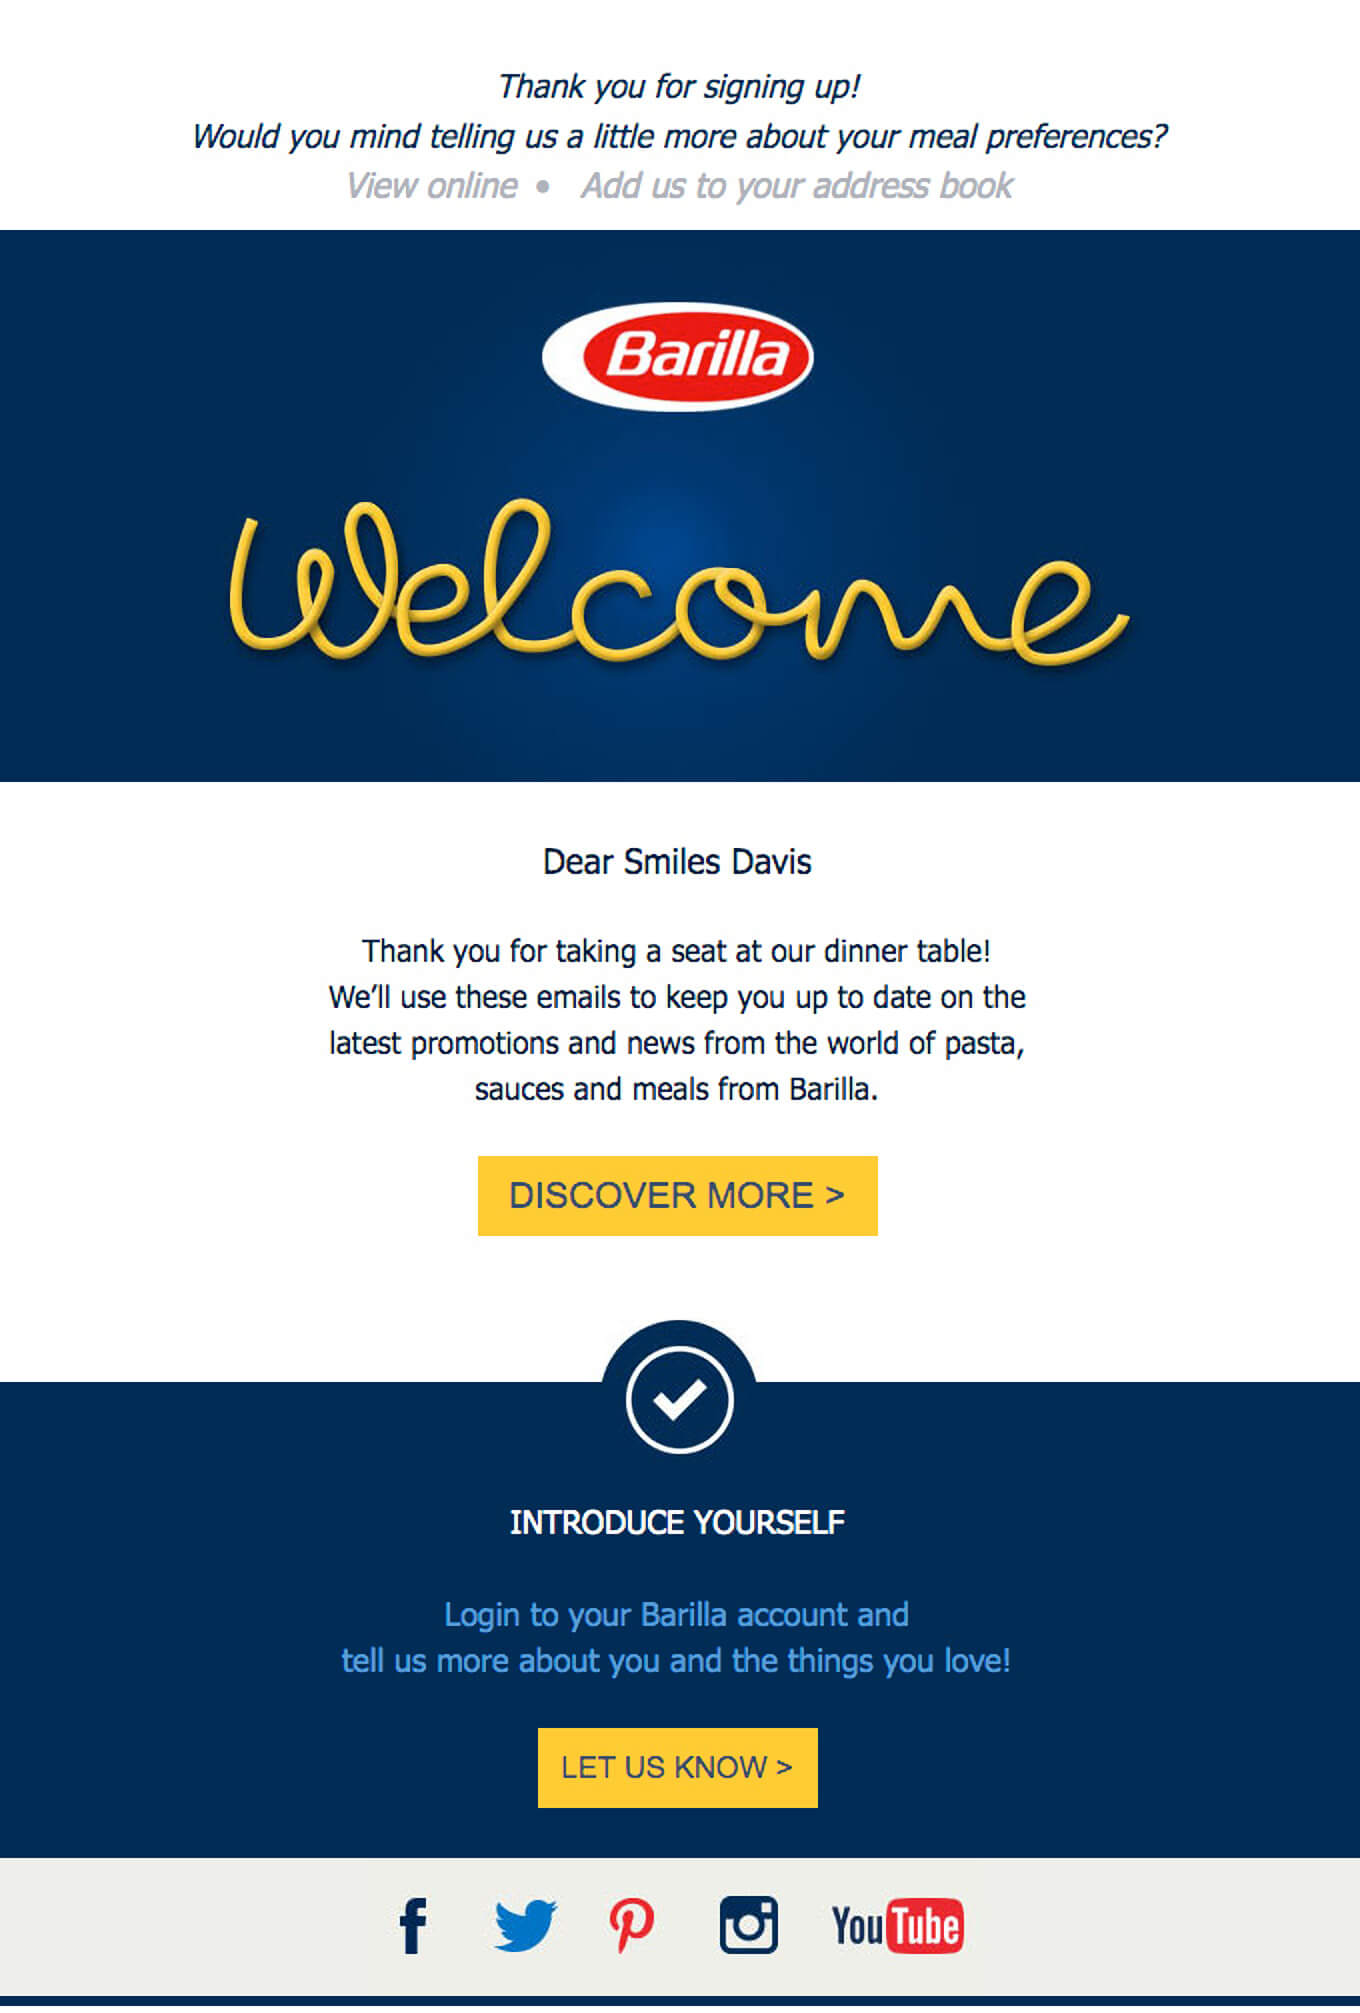 welcome email by Barilla